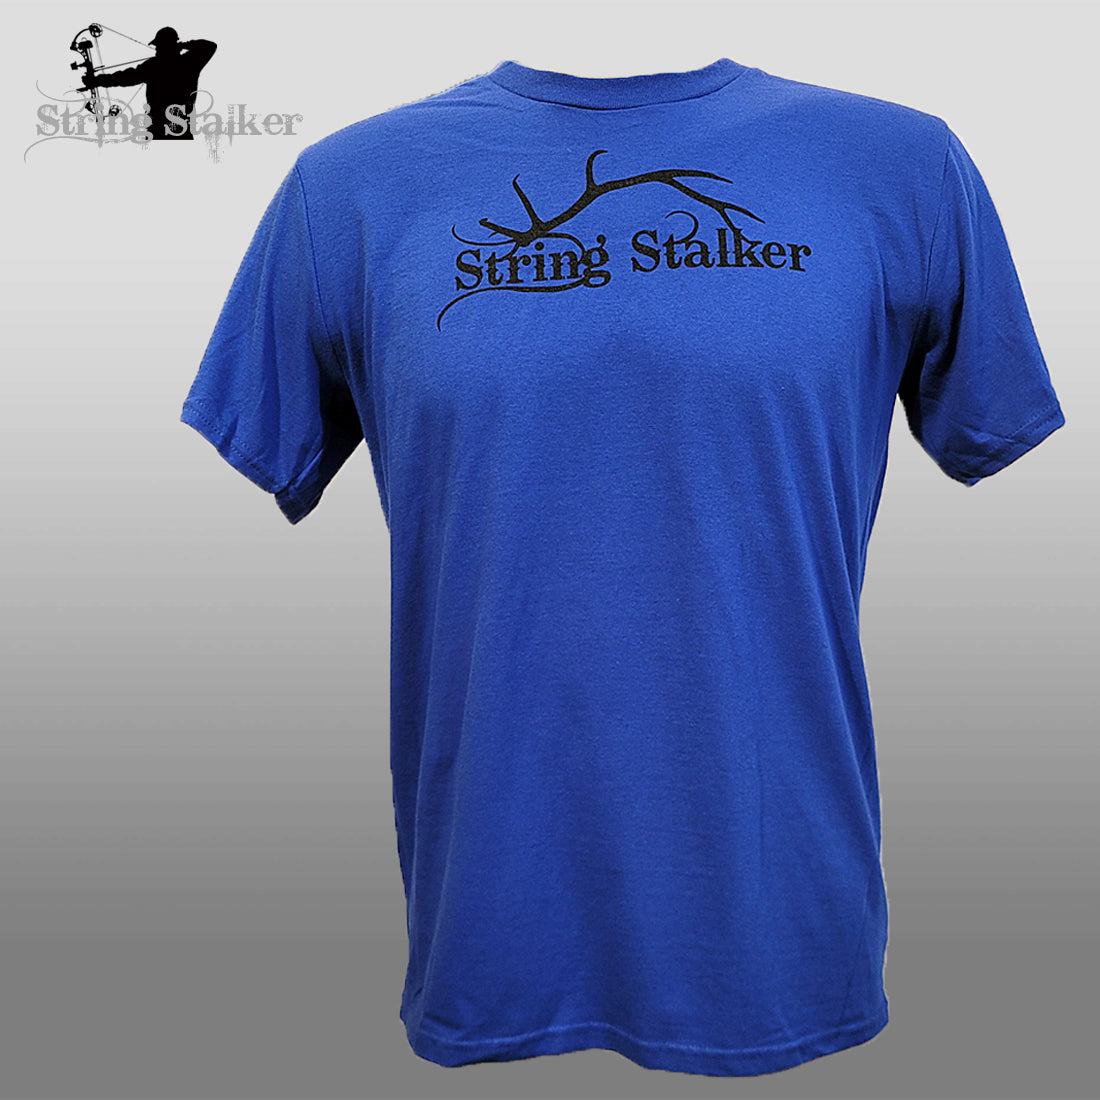 Youth Boys Shed Stalker Tee - Royal Blue